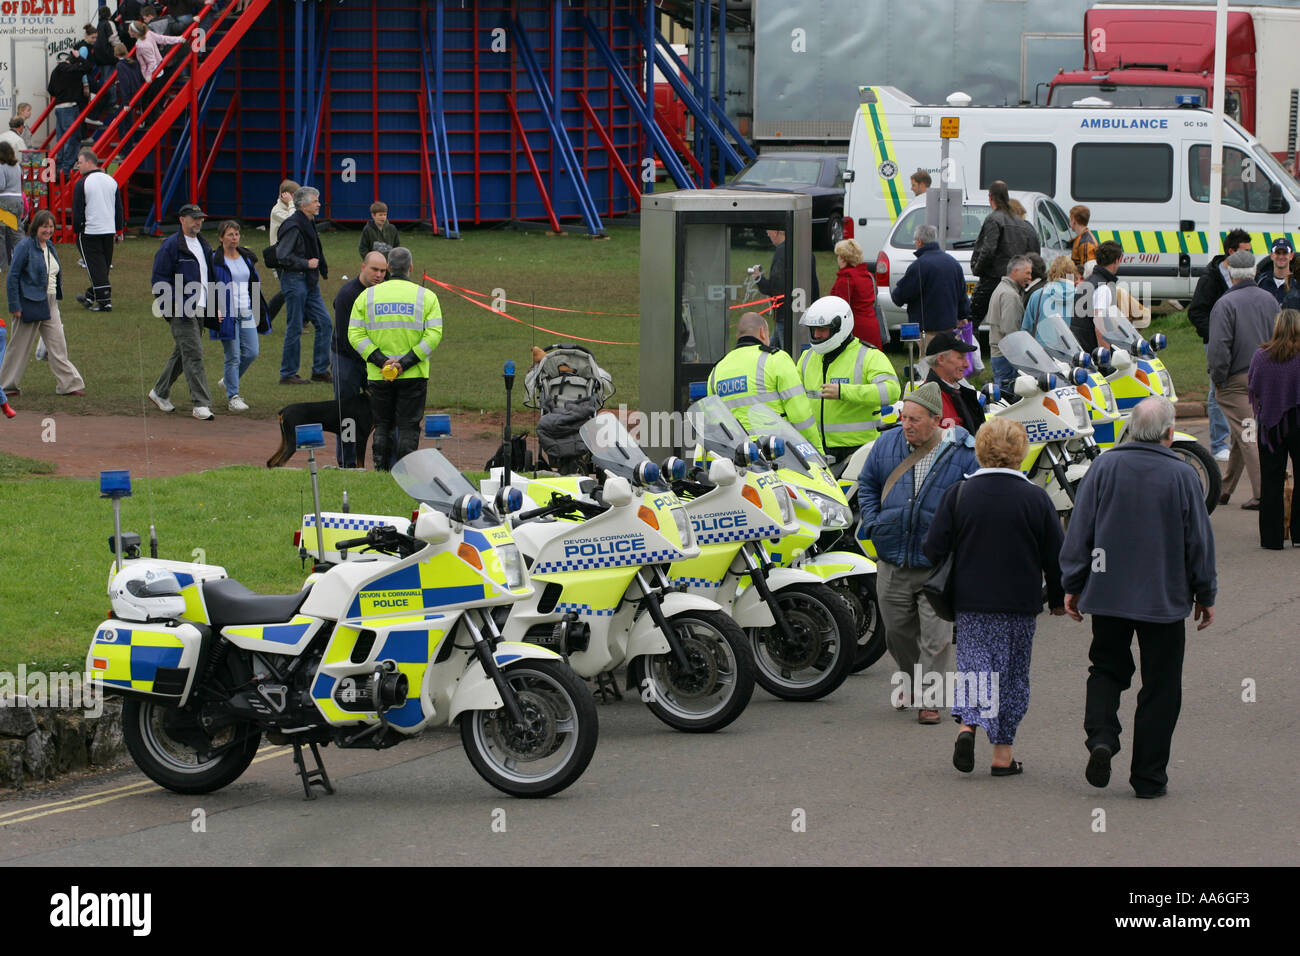 Long row of police force motorbikes motorcycles at a motorbike rally in Paignton South Devon England UK Britian Stock Photo